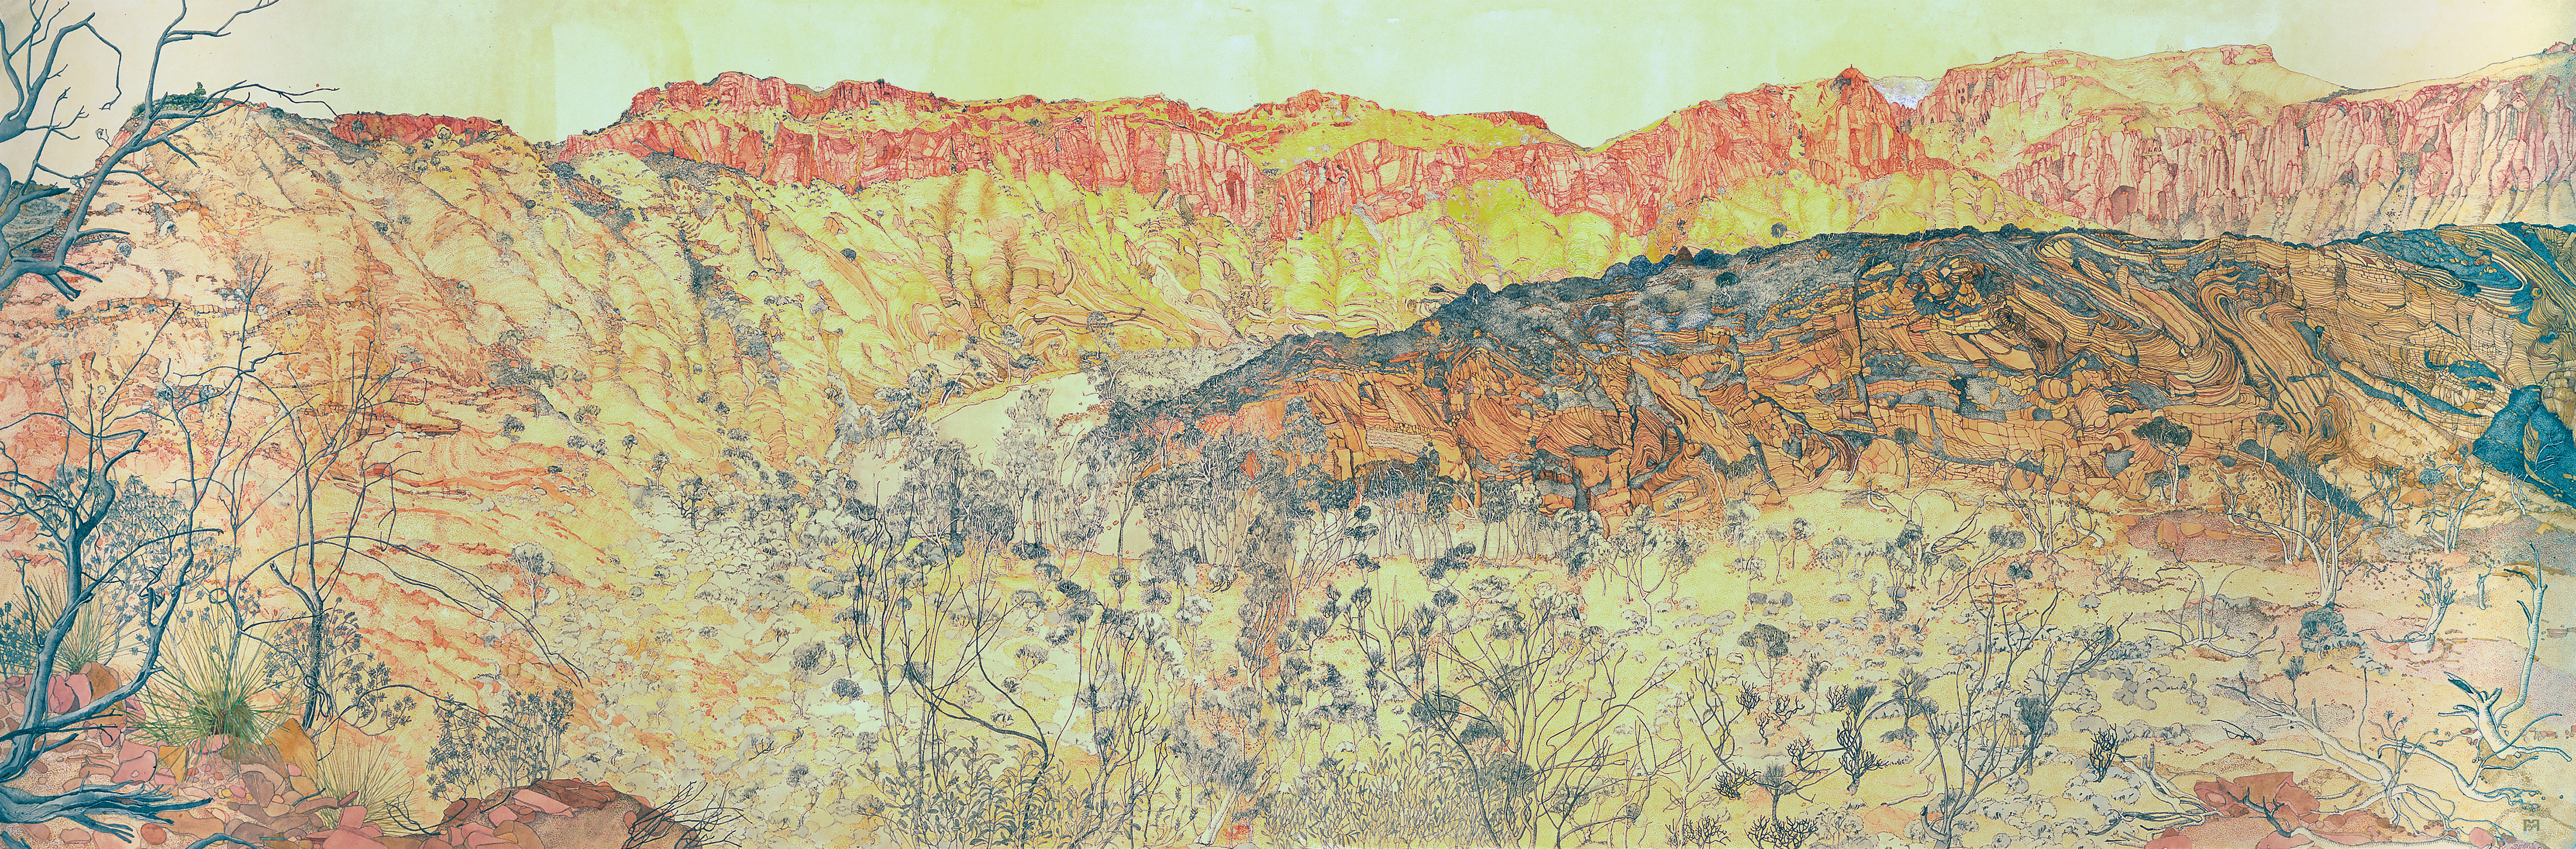 Ruby Gap Landscape (August Expedition), watercolour ink drawing, 95 X 229cm